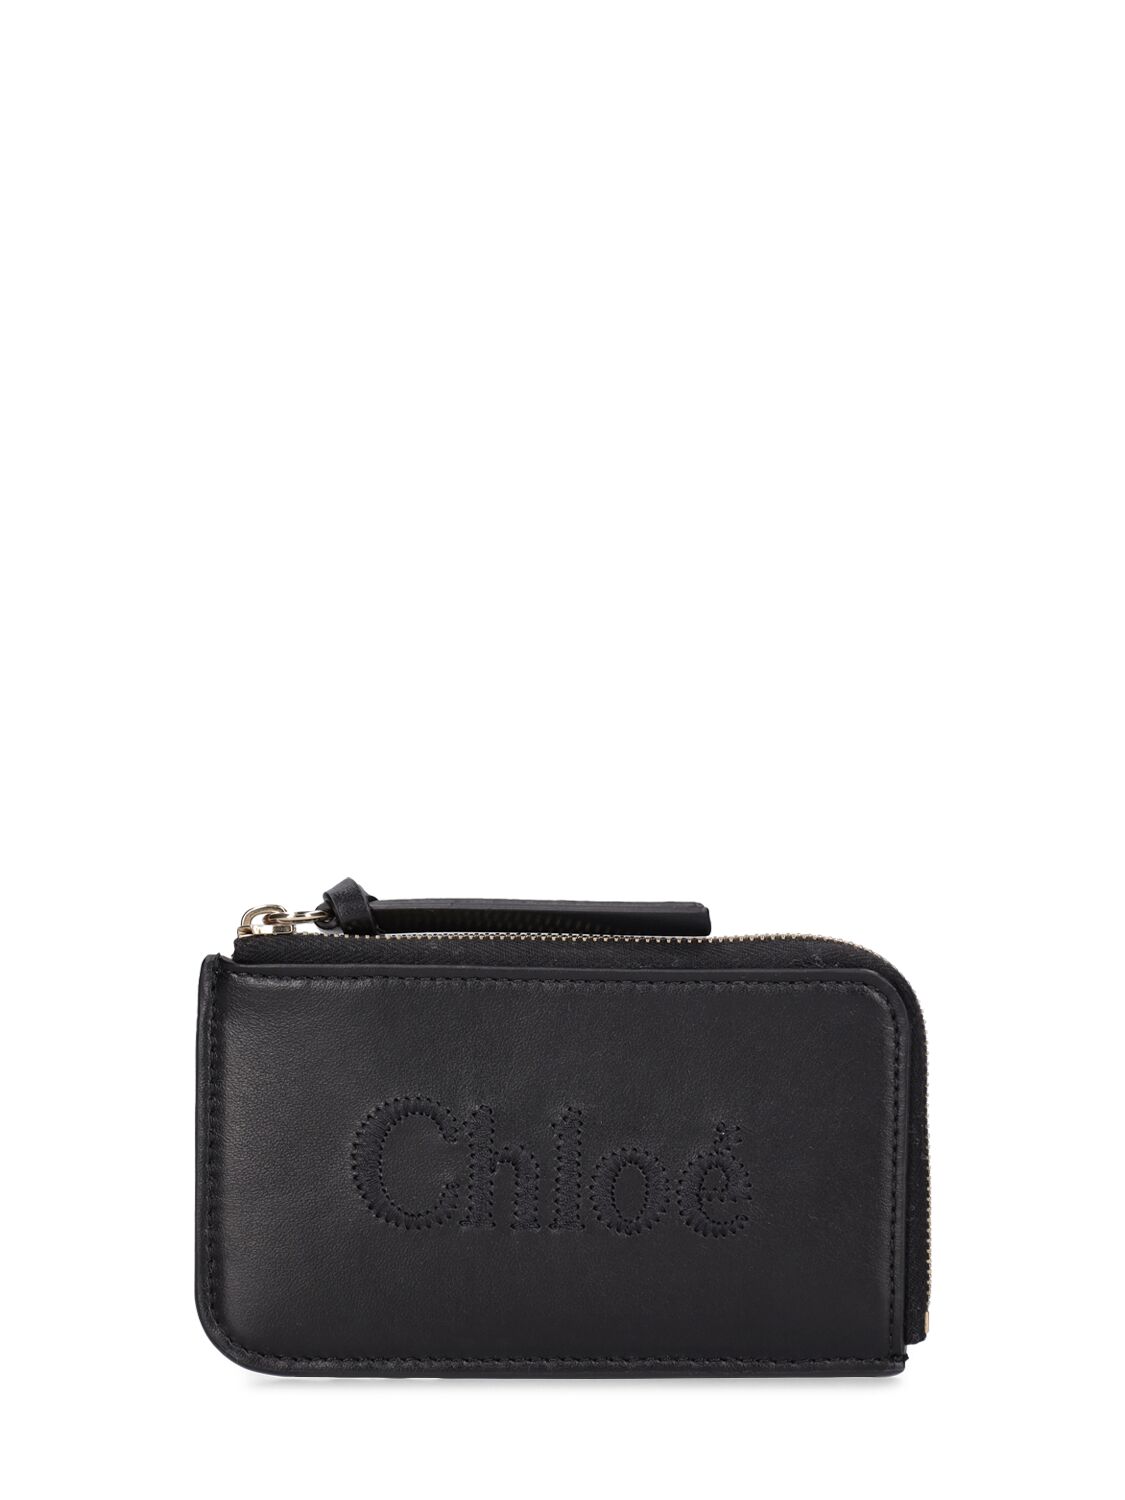 Image of Small Chlooè Sense Leather Zipped Wallet